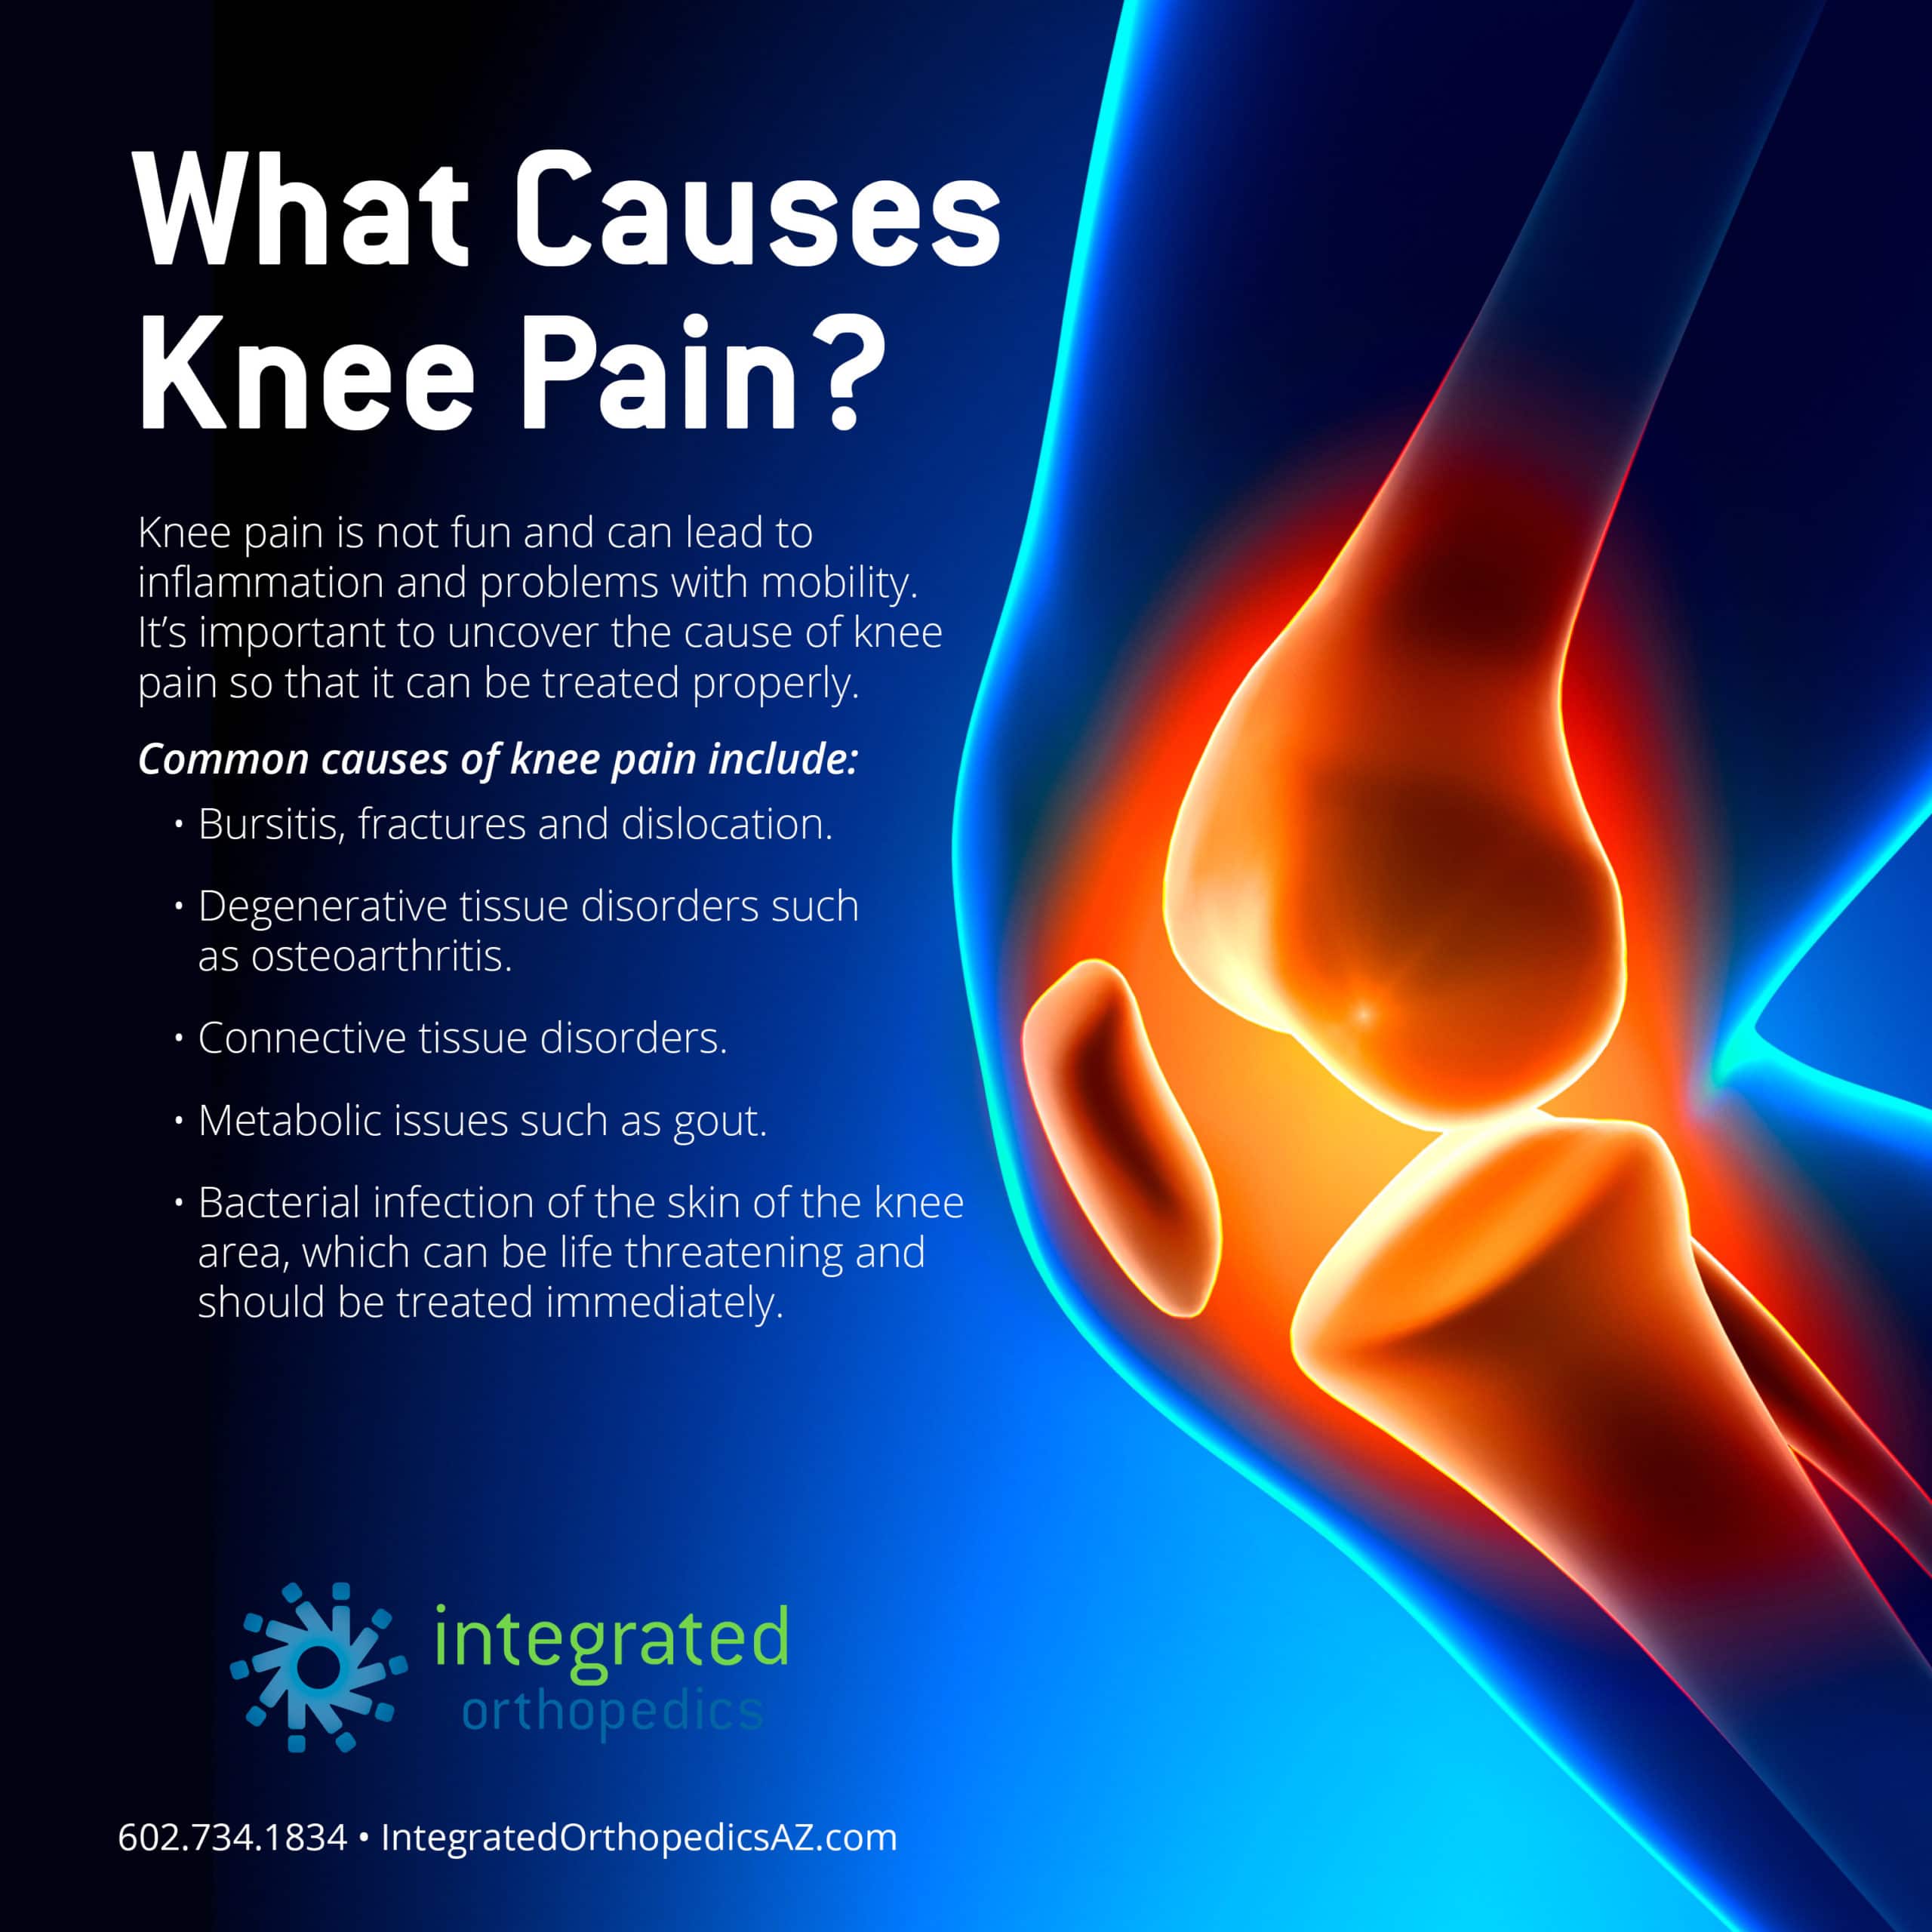 What Causes of Knee Pain